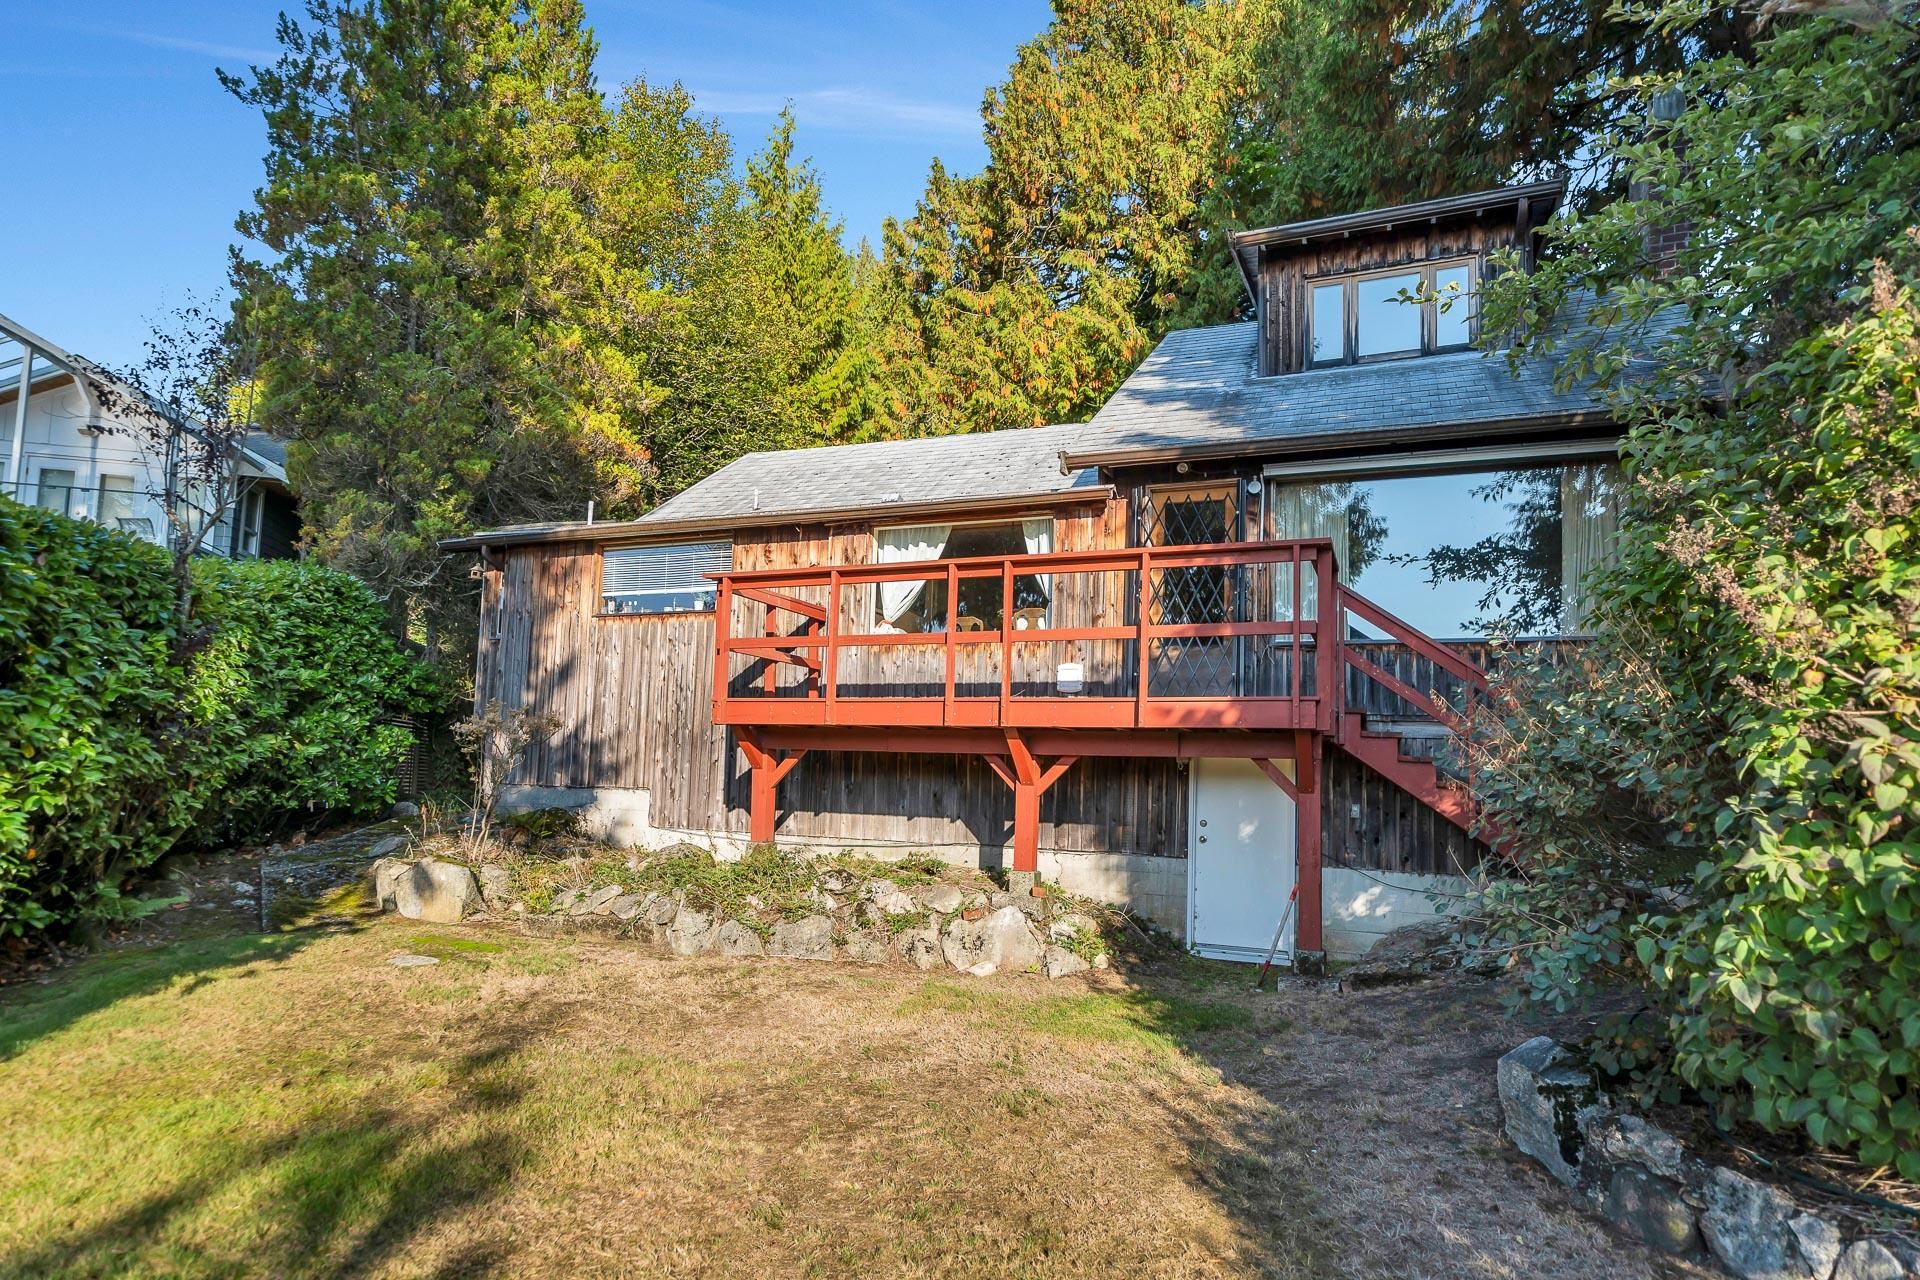 Listing image of 4573 STRATHCONA ROAD